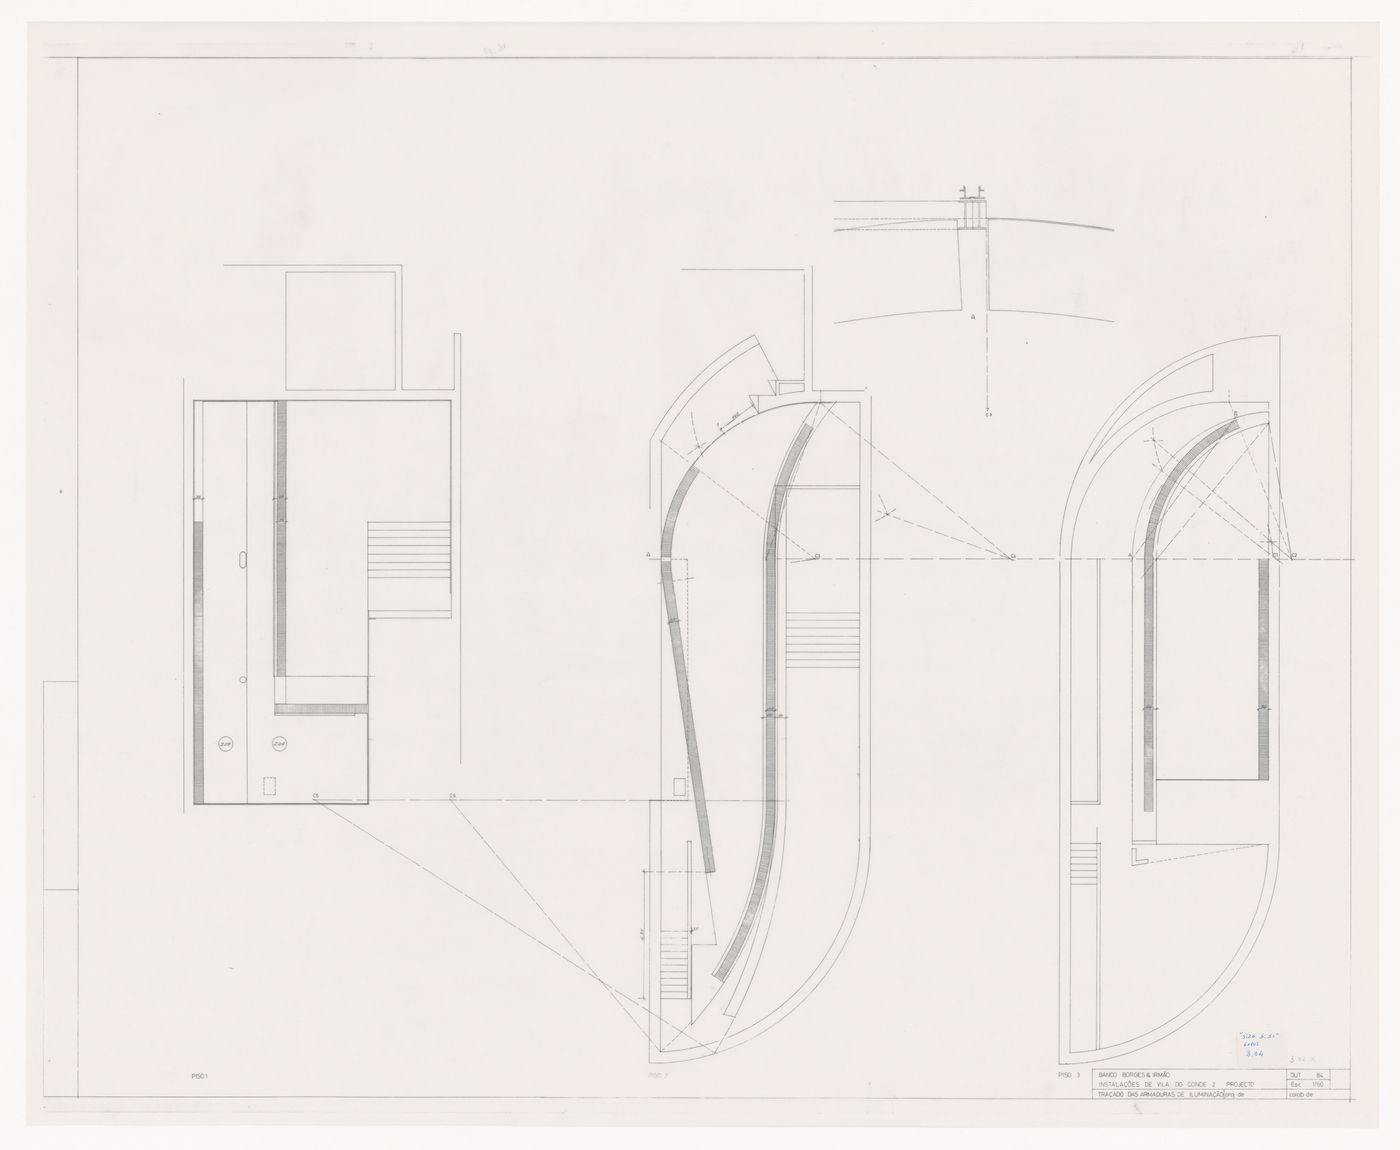 Plans showing layout of lighting for Banco Borges & Irmão II [Borges & Irmão bank II], Vila do Conde, Portugal